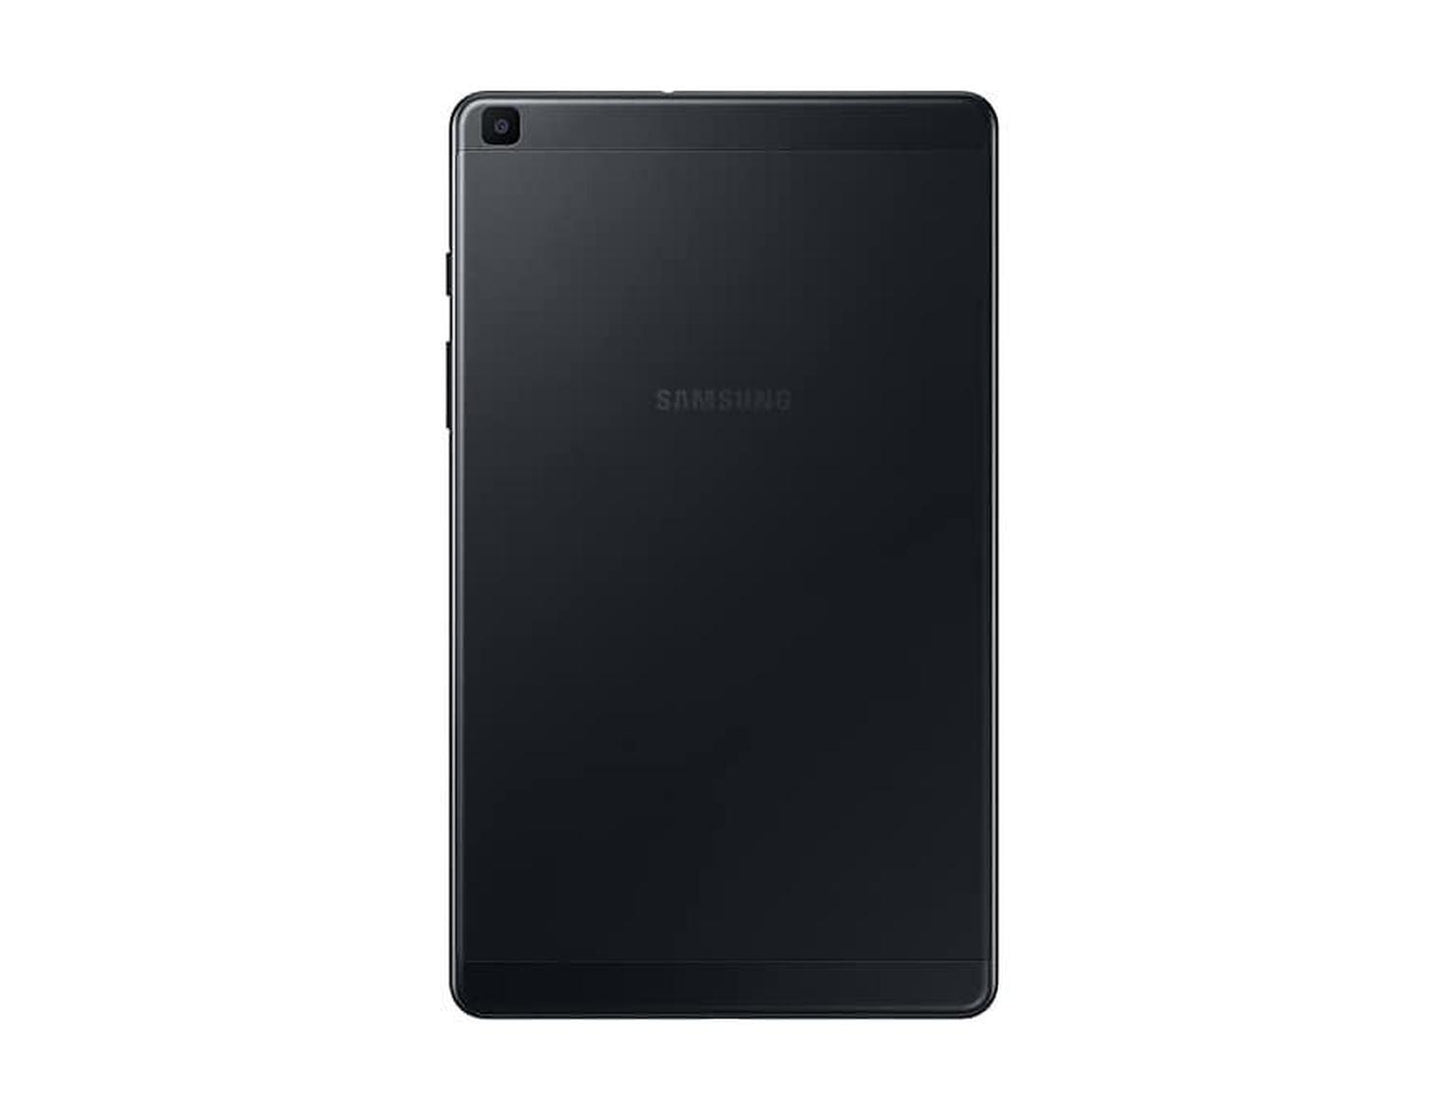 Tablet Samsung Galaxy Tab A 8", 32GB, 1280 x 800 Pixeles, Android 9.0, Bluetooth 4.2, Negro